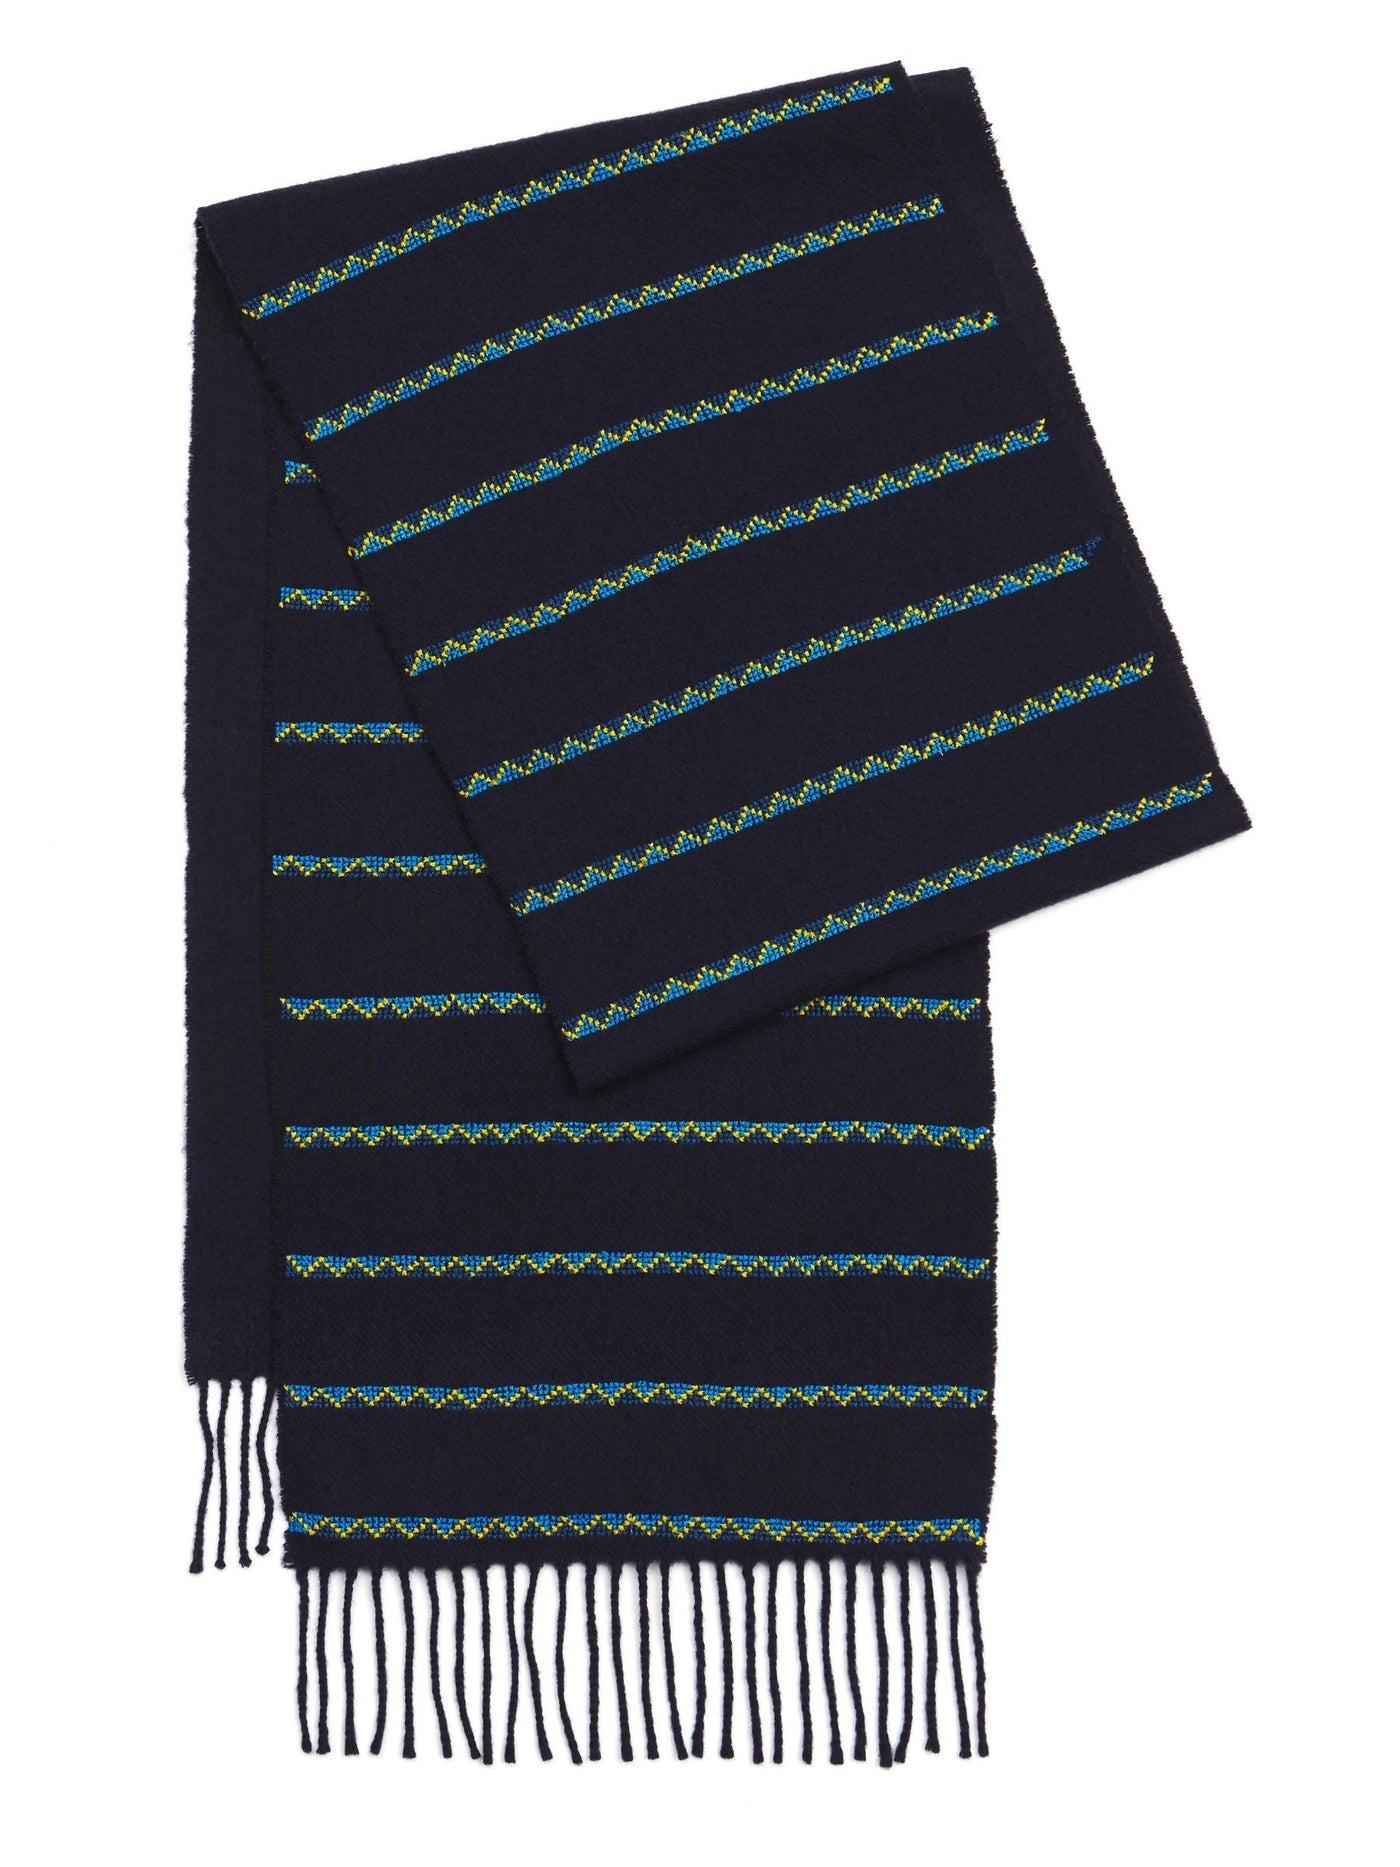 mens cashmere scarf hand embroidered striped